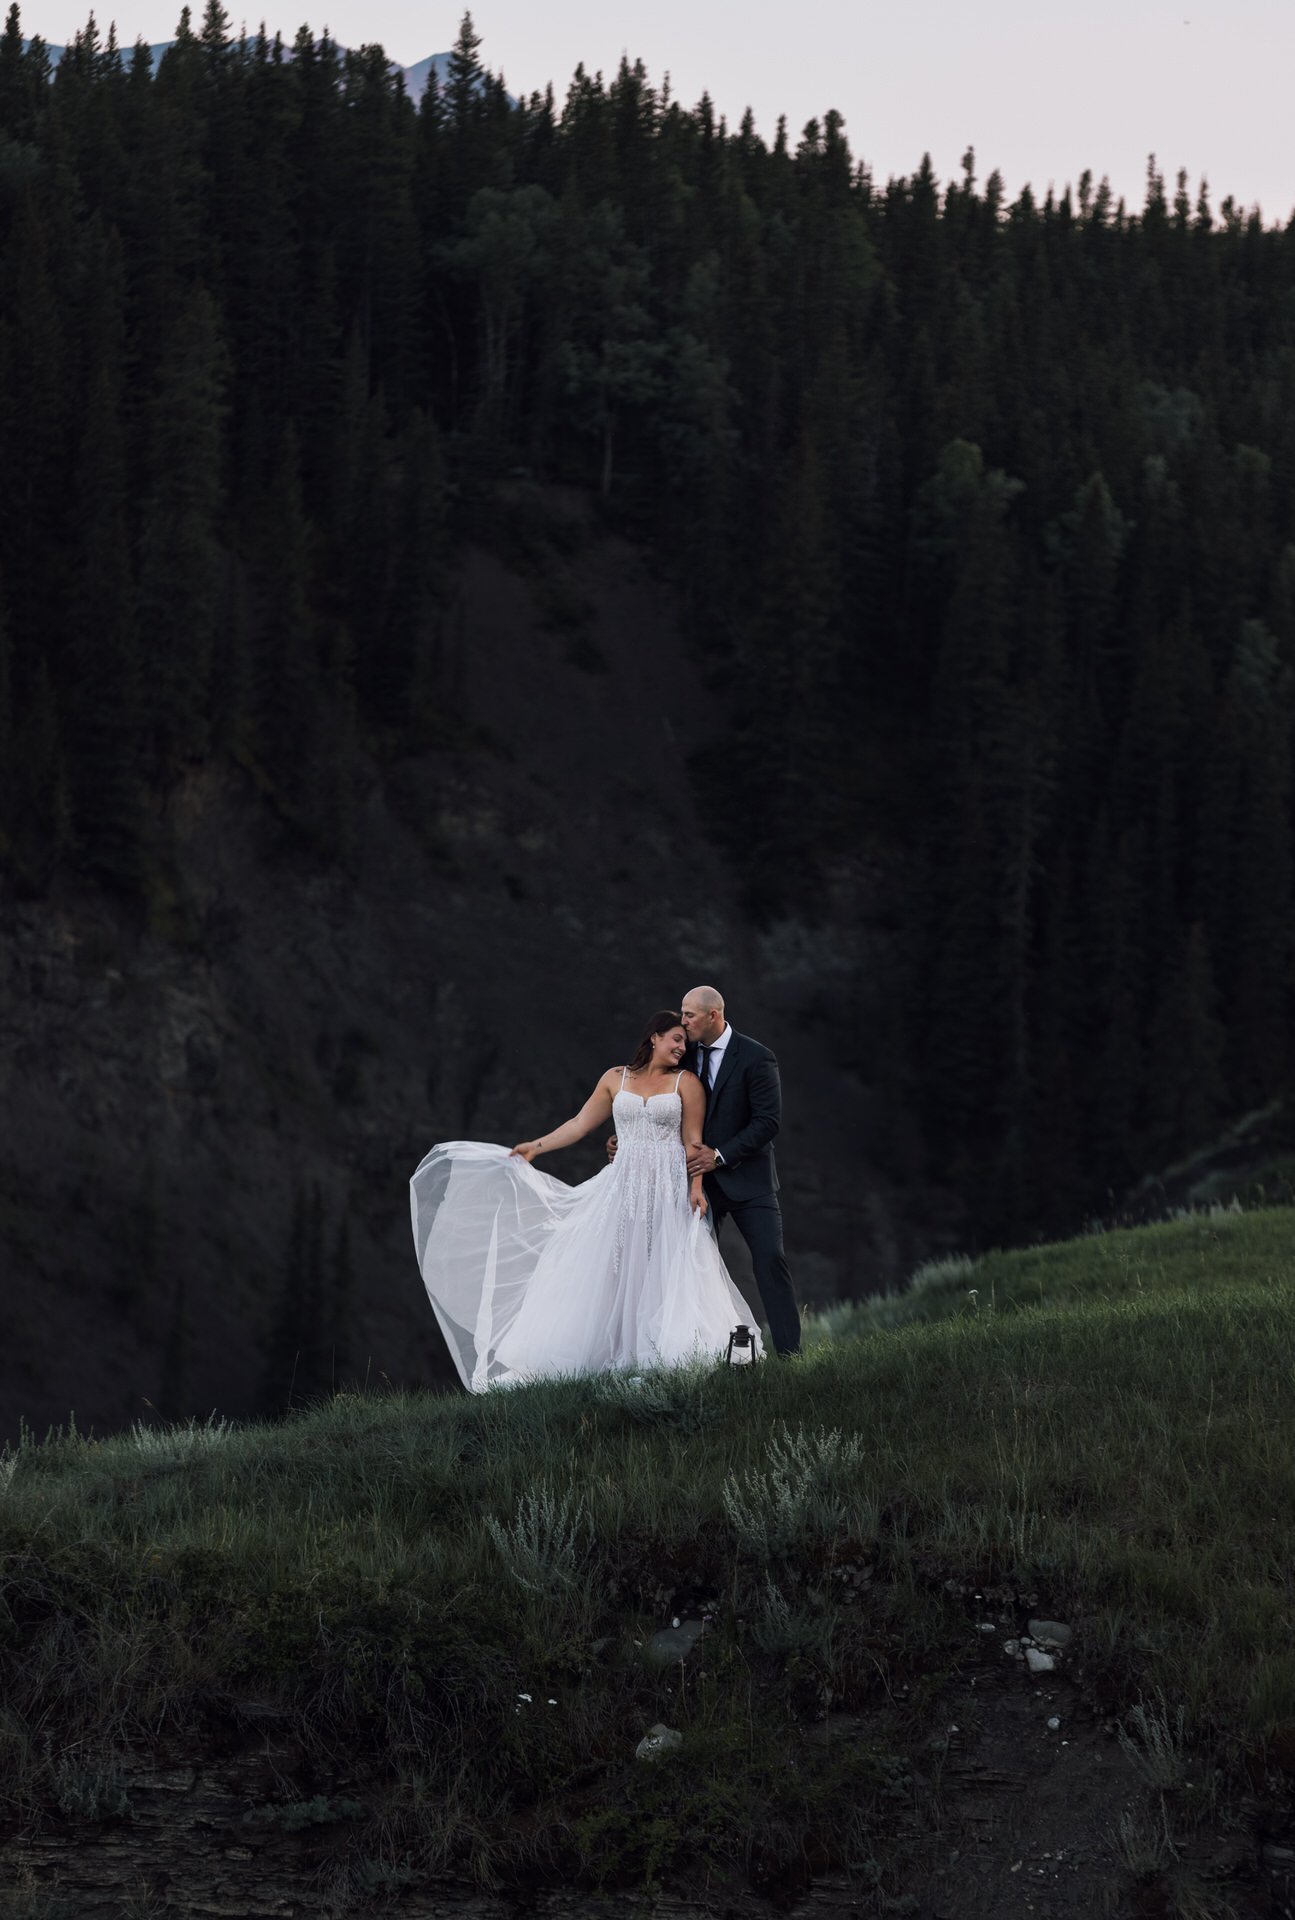 all inclusive elopement wedding packages in alberta